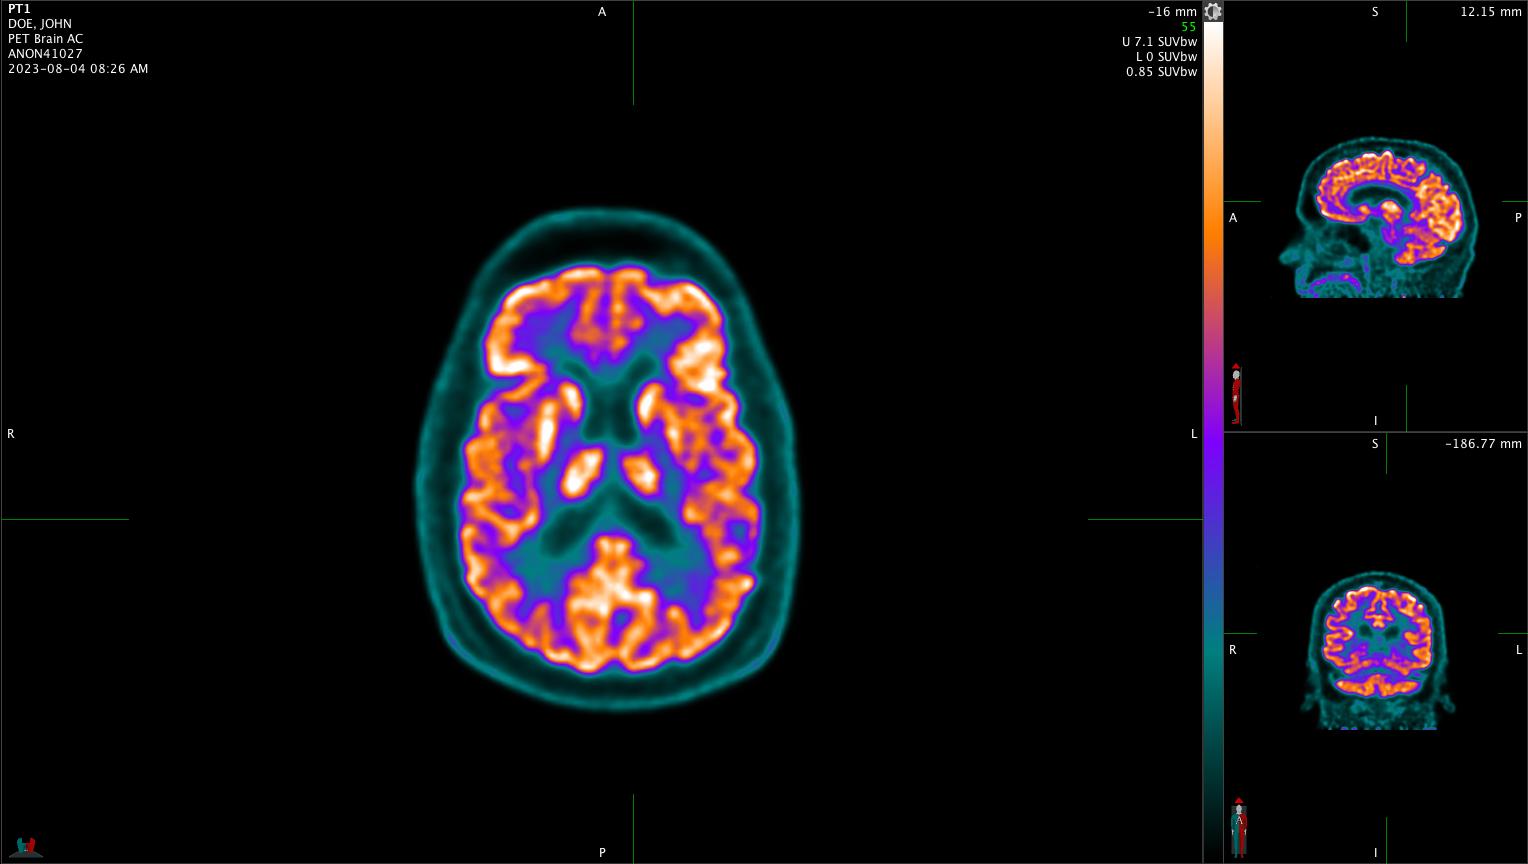 Could an emerging type of brain PET scan make life better for Alzheimer’s and dementia patients?